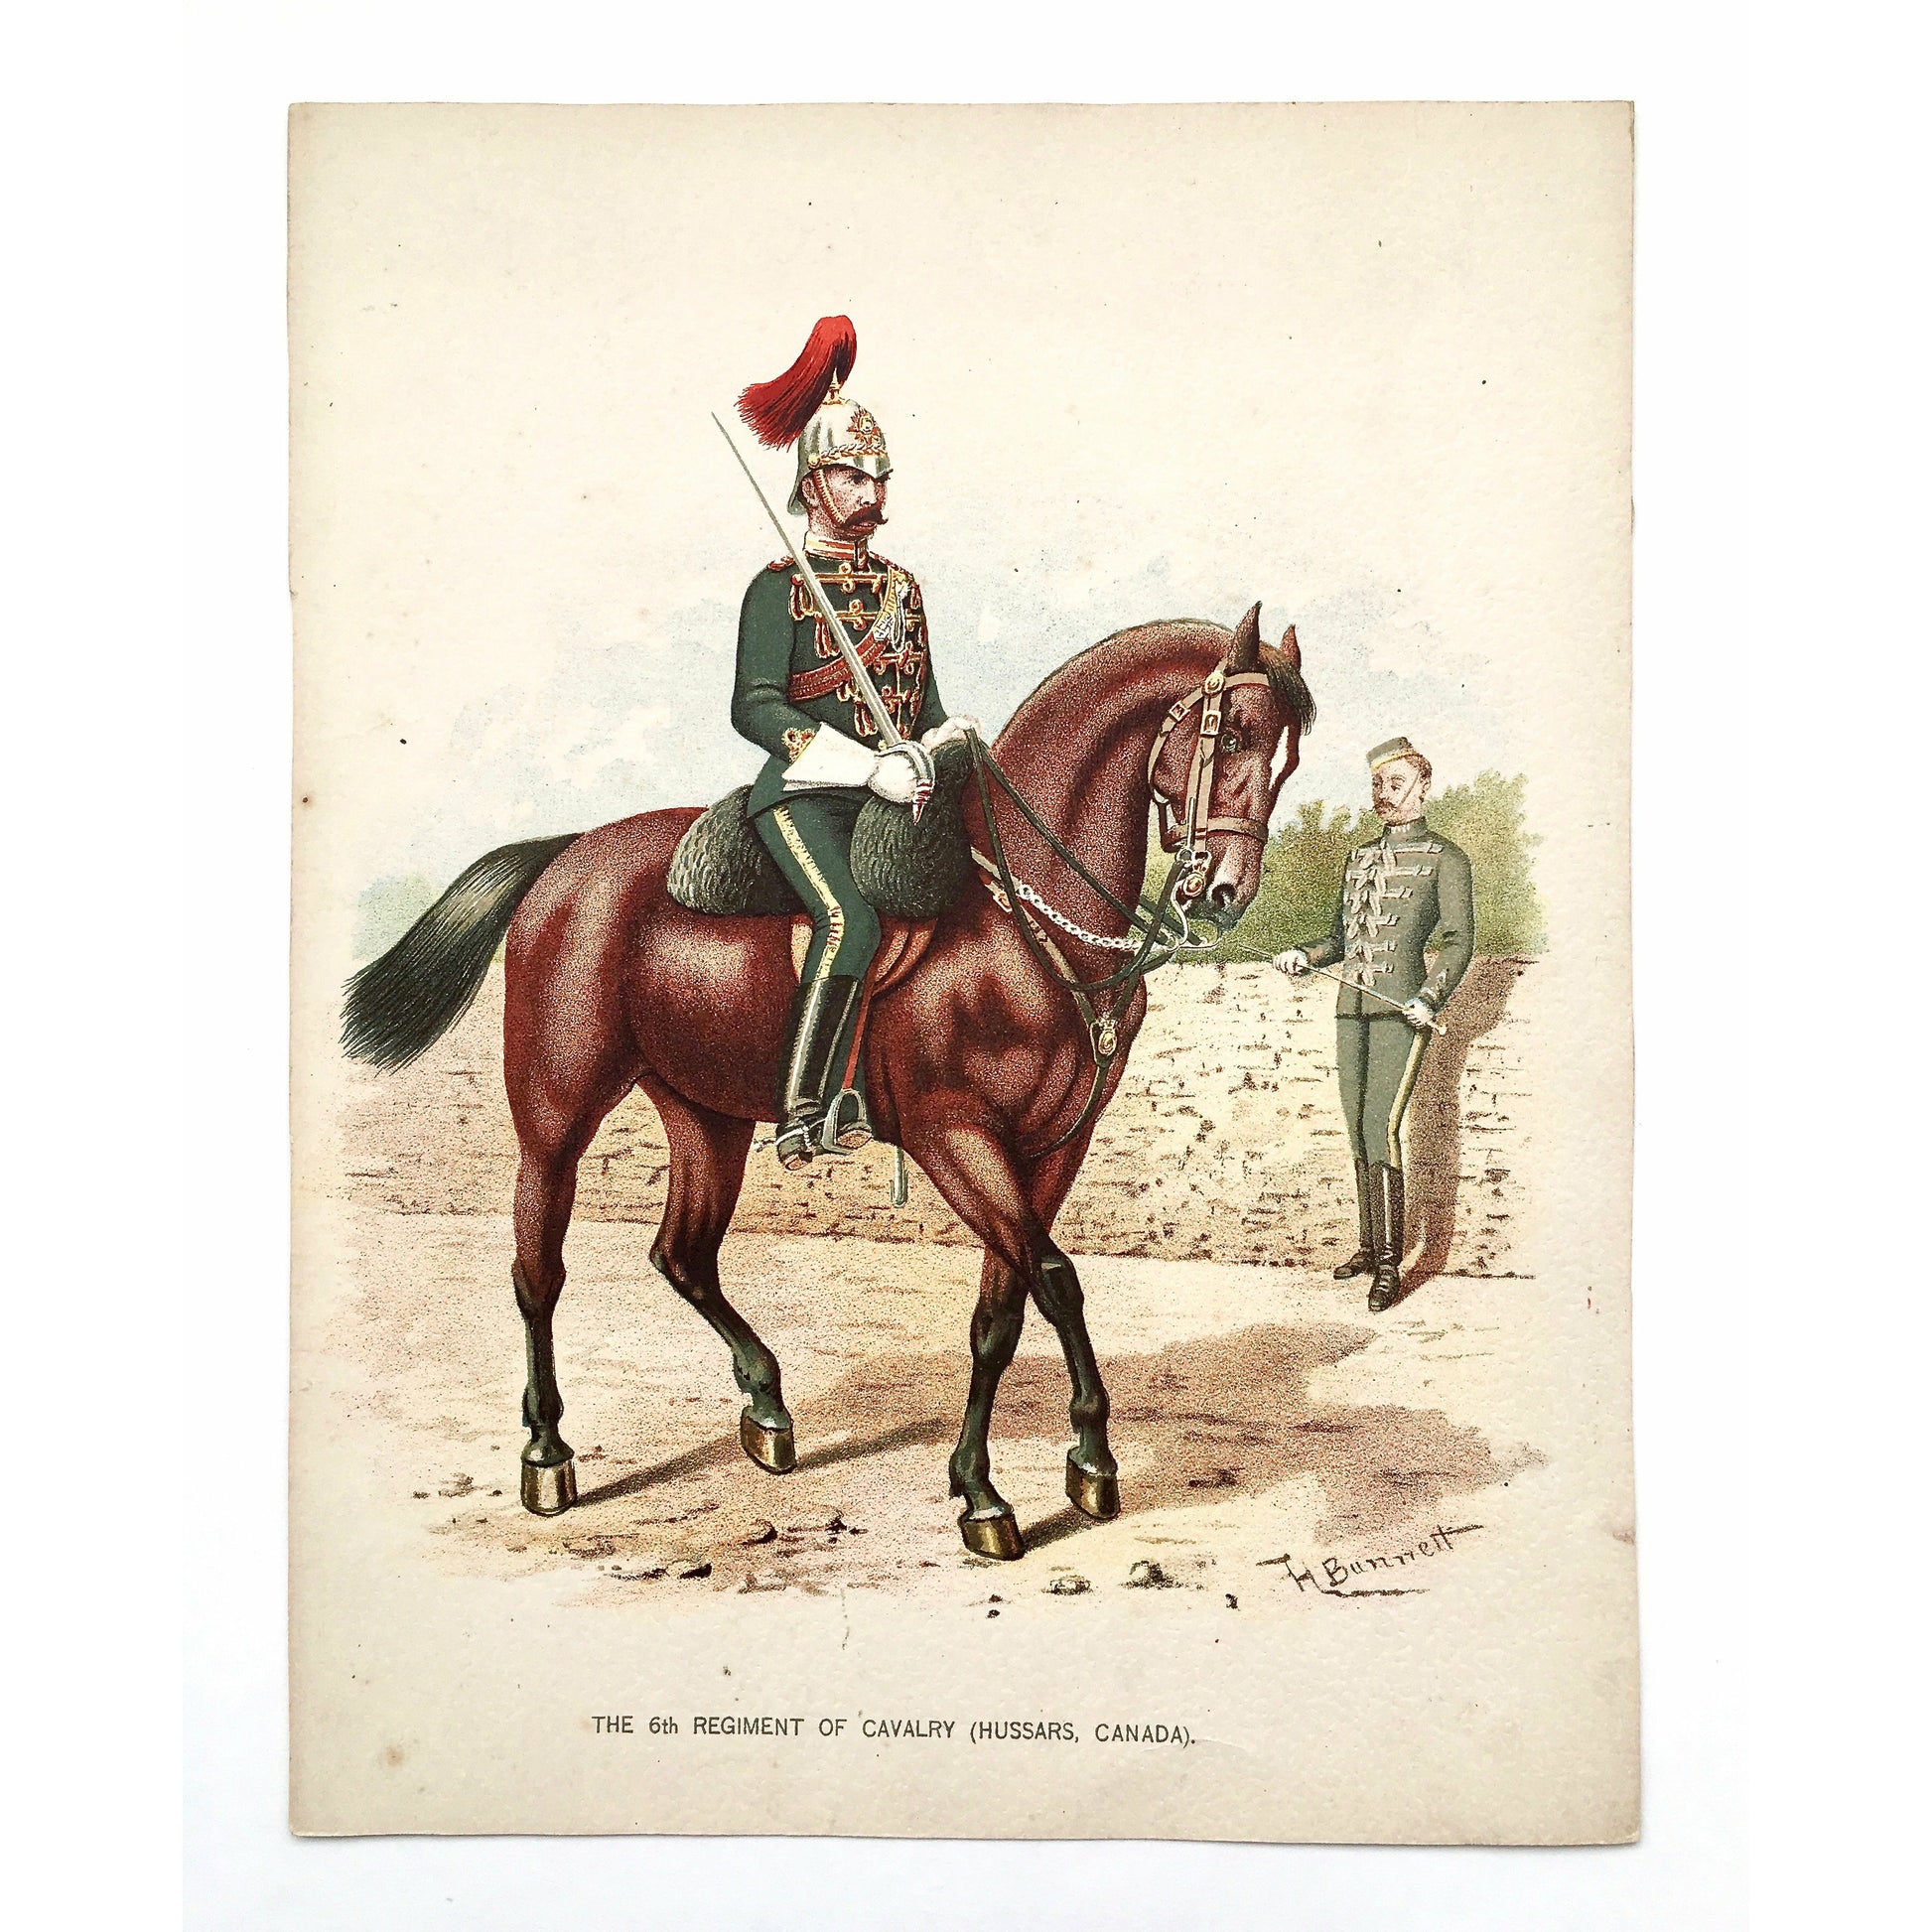 The 6th Regiment of Cavalry, Cavalry, 6th Regiment, Hussars, Canada, Artillery, Military, Military Costume, Horses, Riding, Costume, Uniform, Her Majesty's Army, Regiments, Queen's Forces, H. Bunnett, Bunnett, Sword, Army, London, 1890, Military Prints, Canadian, Canadian Military, Canadian Army, Armed Forces, Chromolithograph, J. S. Virtue & Co., Antique Prints, Antique, Vintage, Prints, Interior Decor, Home Decor, Wall Decor, Wall art, Interior Design, Gallery wall, Inspiration, Military History, Arts,